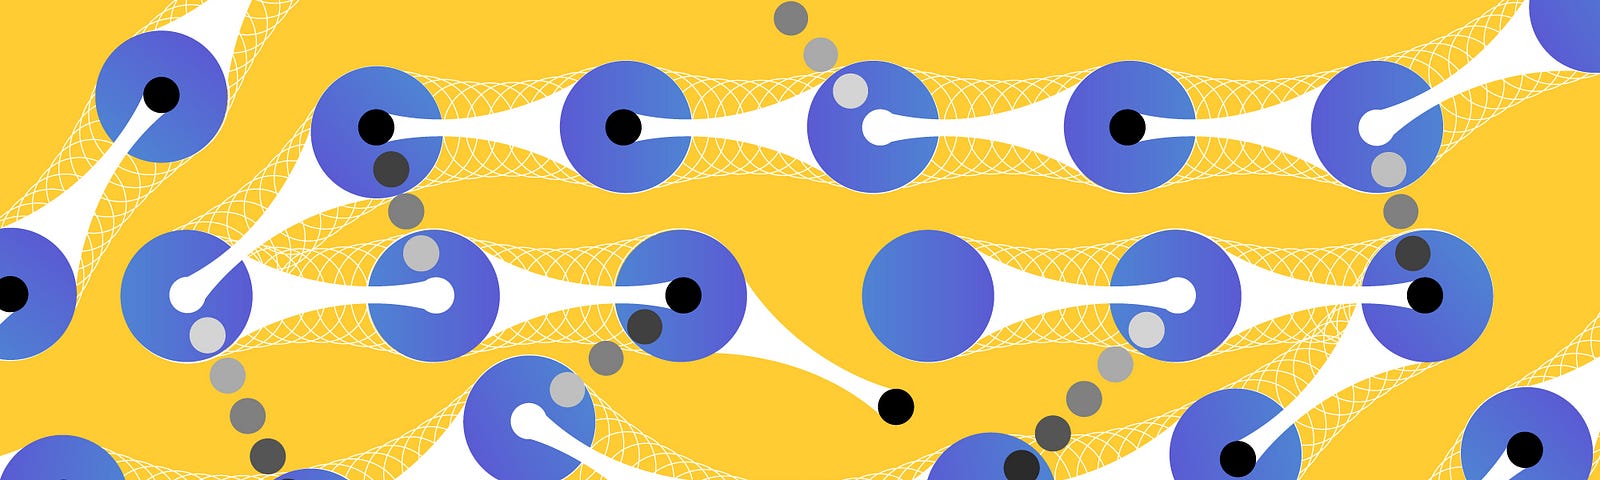 yellow background. Linked network of blue circles